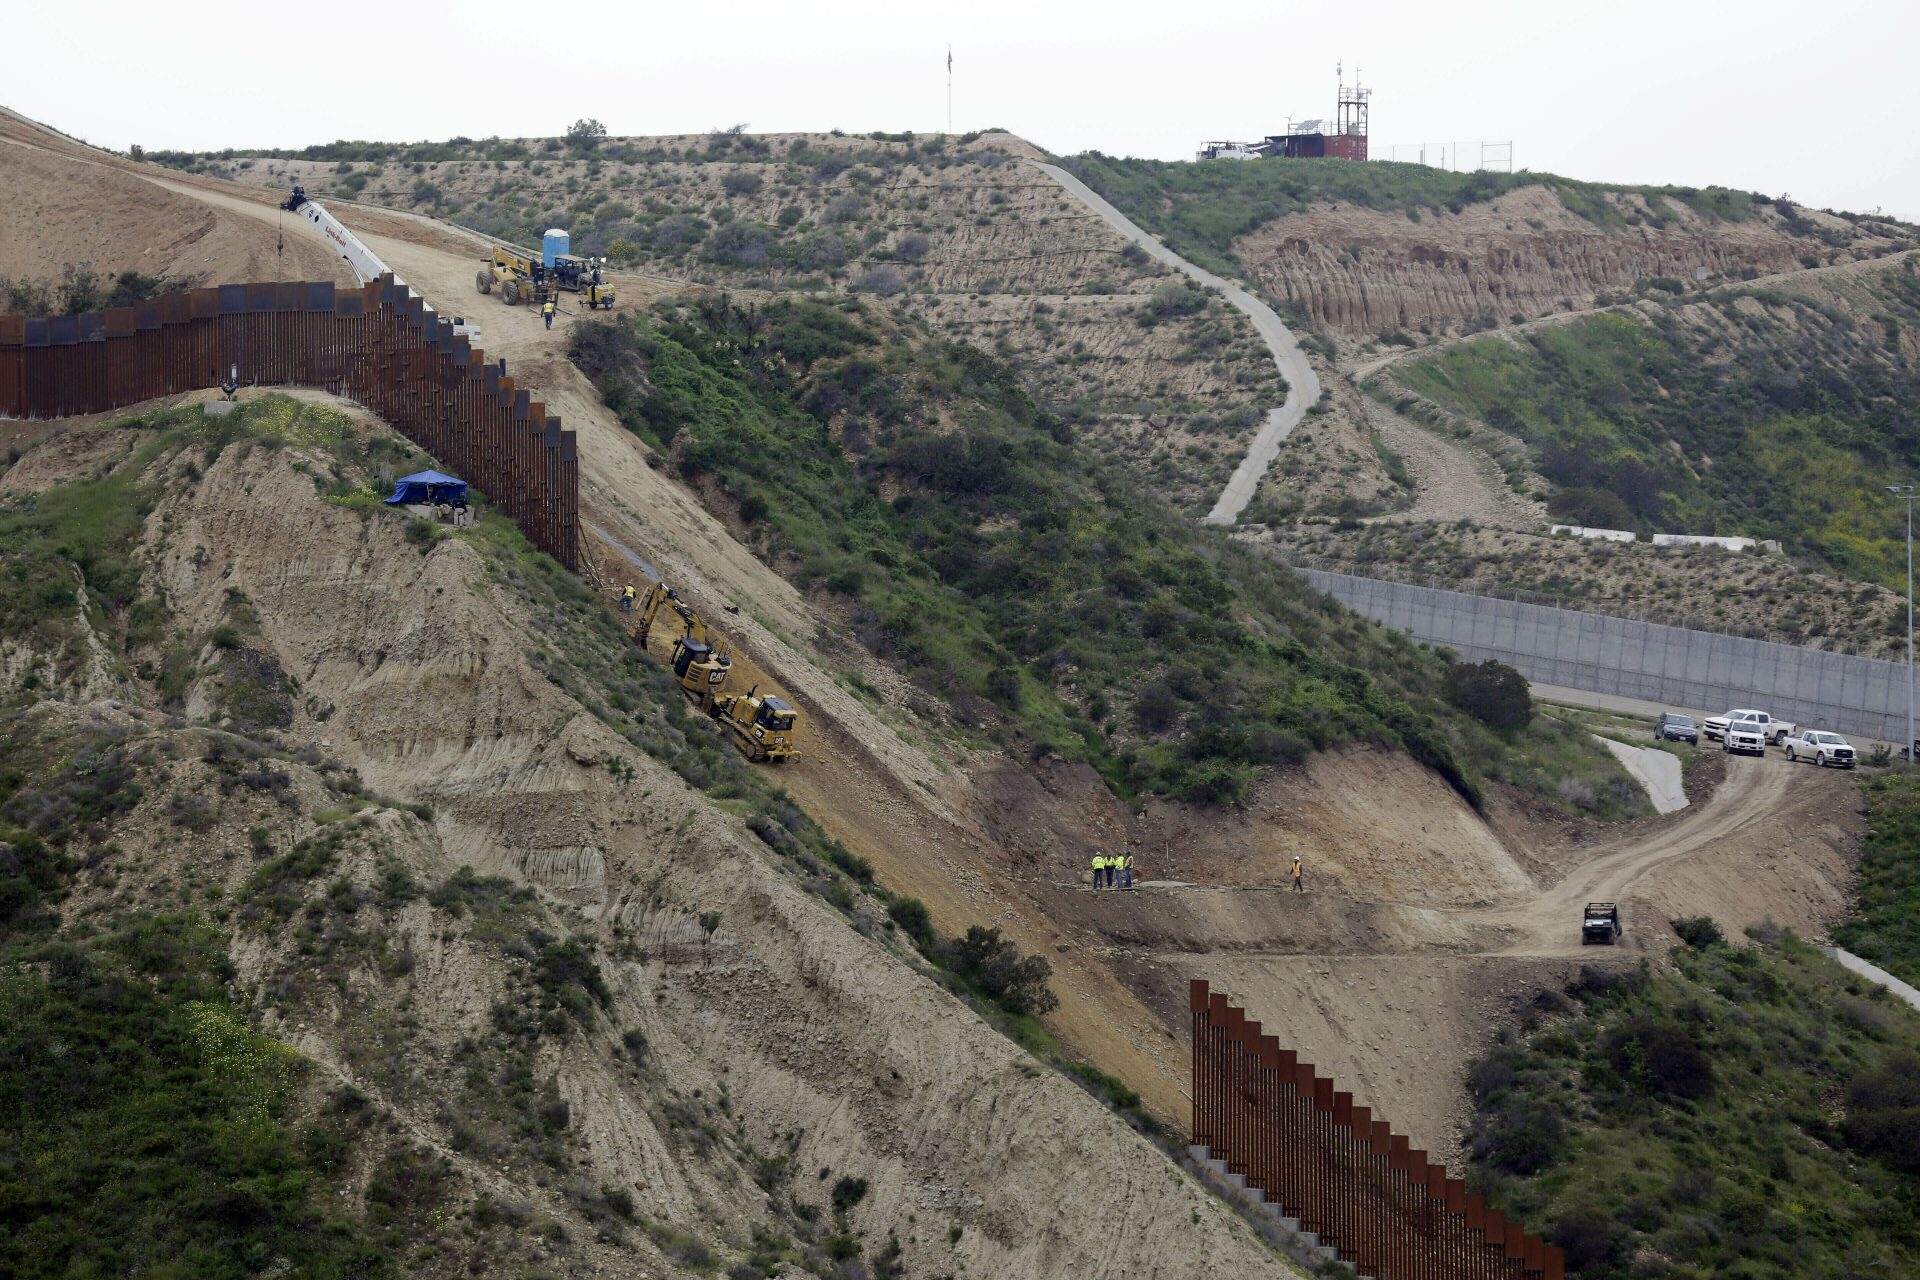 FILE PHOTO: In this March 11, 2019 photo, construction crews replace a section of the primary wall separating San Diego, above right, and Tijuana, Mexico, below left, seen from Tijuana, Mexico. Defense Secretary Mark Esper has approved the use of $3.6 billion in funding from military construction projects to build 175 miles of President Donald Trump’s wall along the Mexican border.